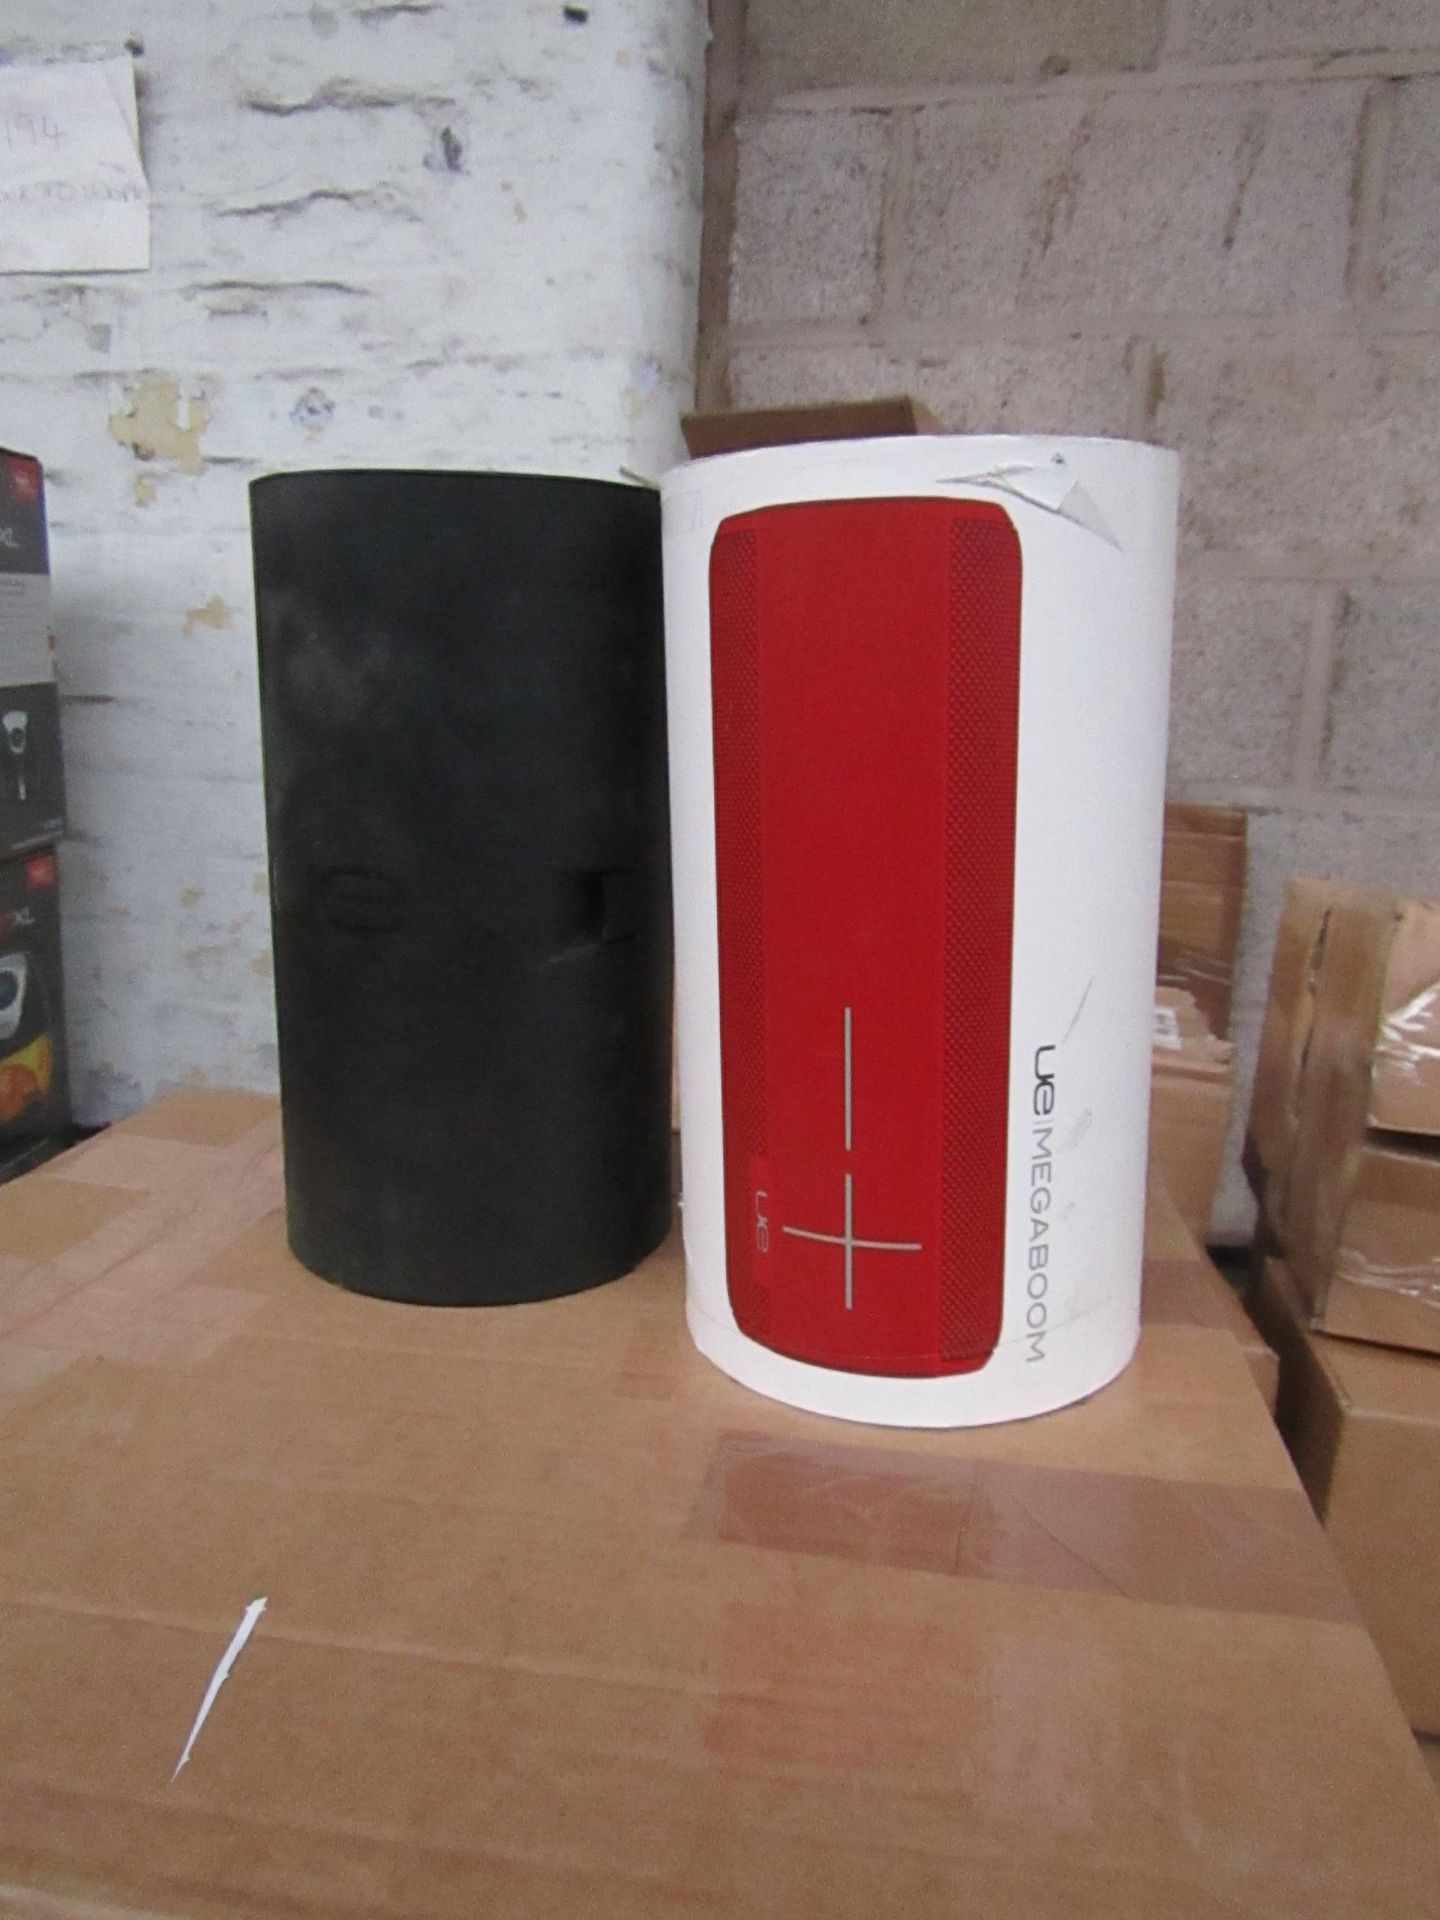 6X UE Megaboom speaker, unchecked. PLEASE NOTE, this lot is picked at random and you may receive a